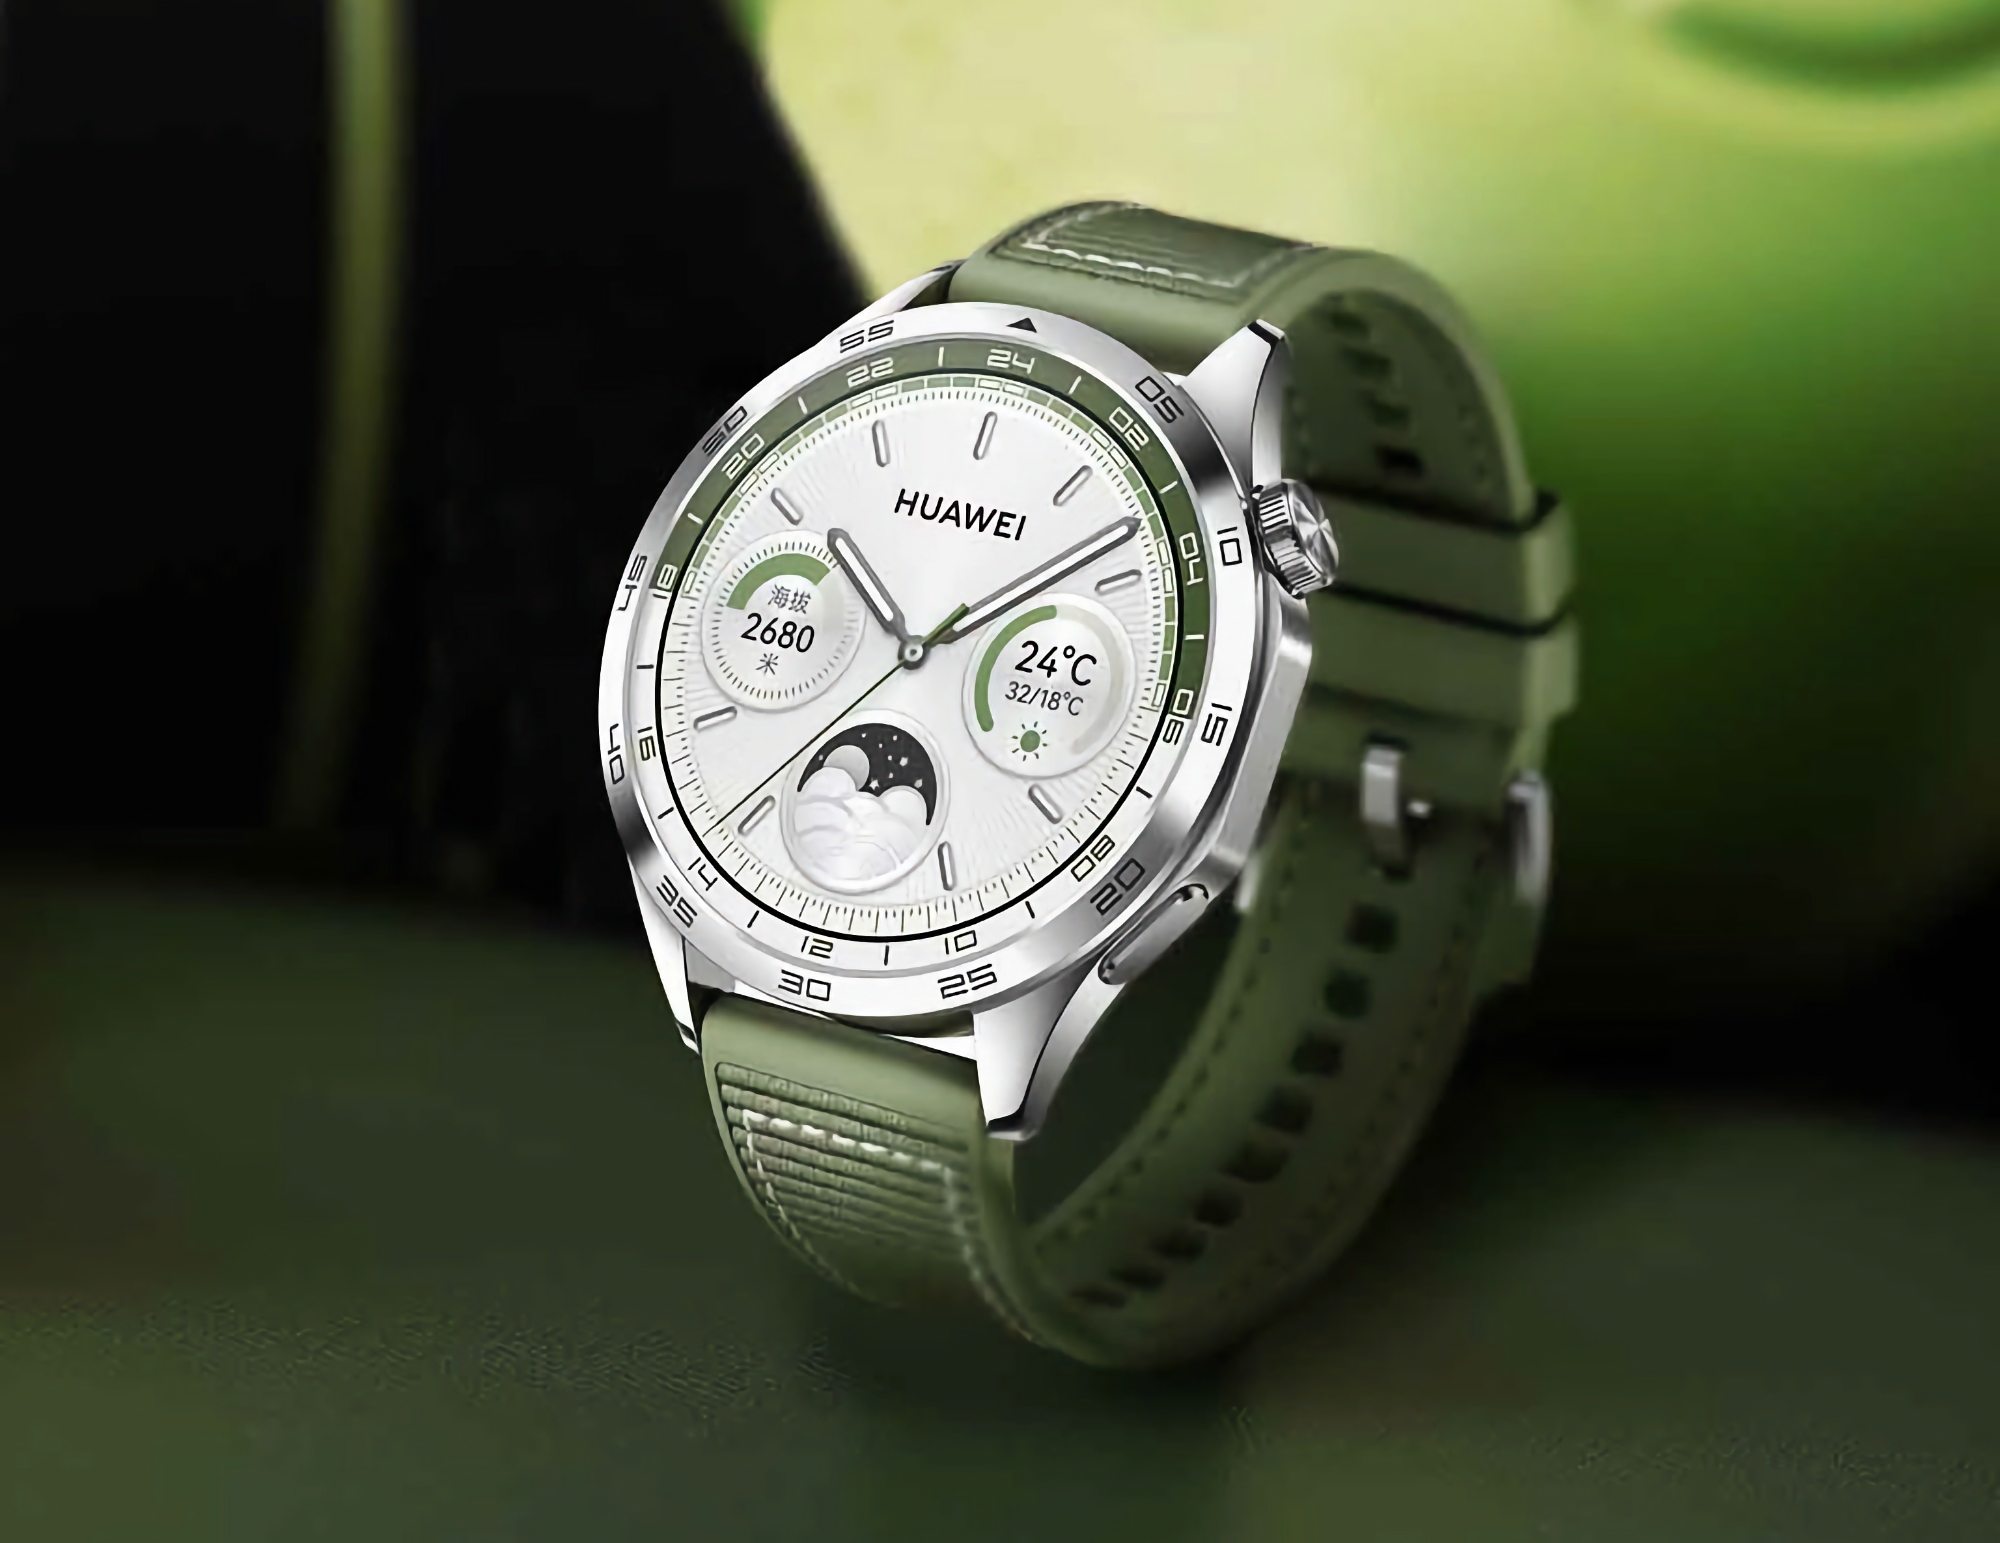 Huawei Watch GT 4 users in Europe have started receiving the HarmonyOS 4.0.0.122 update